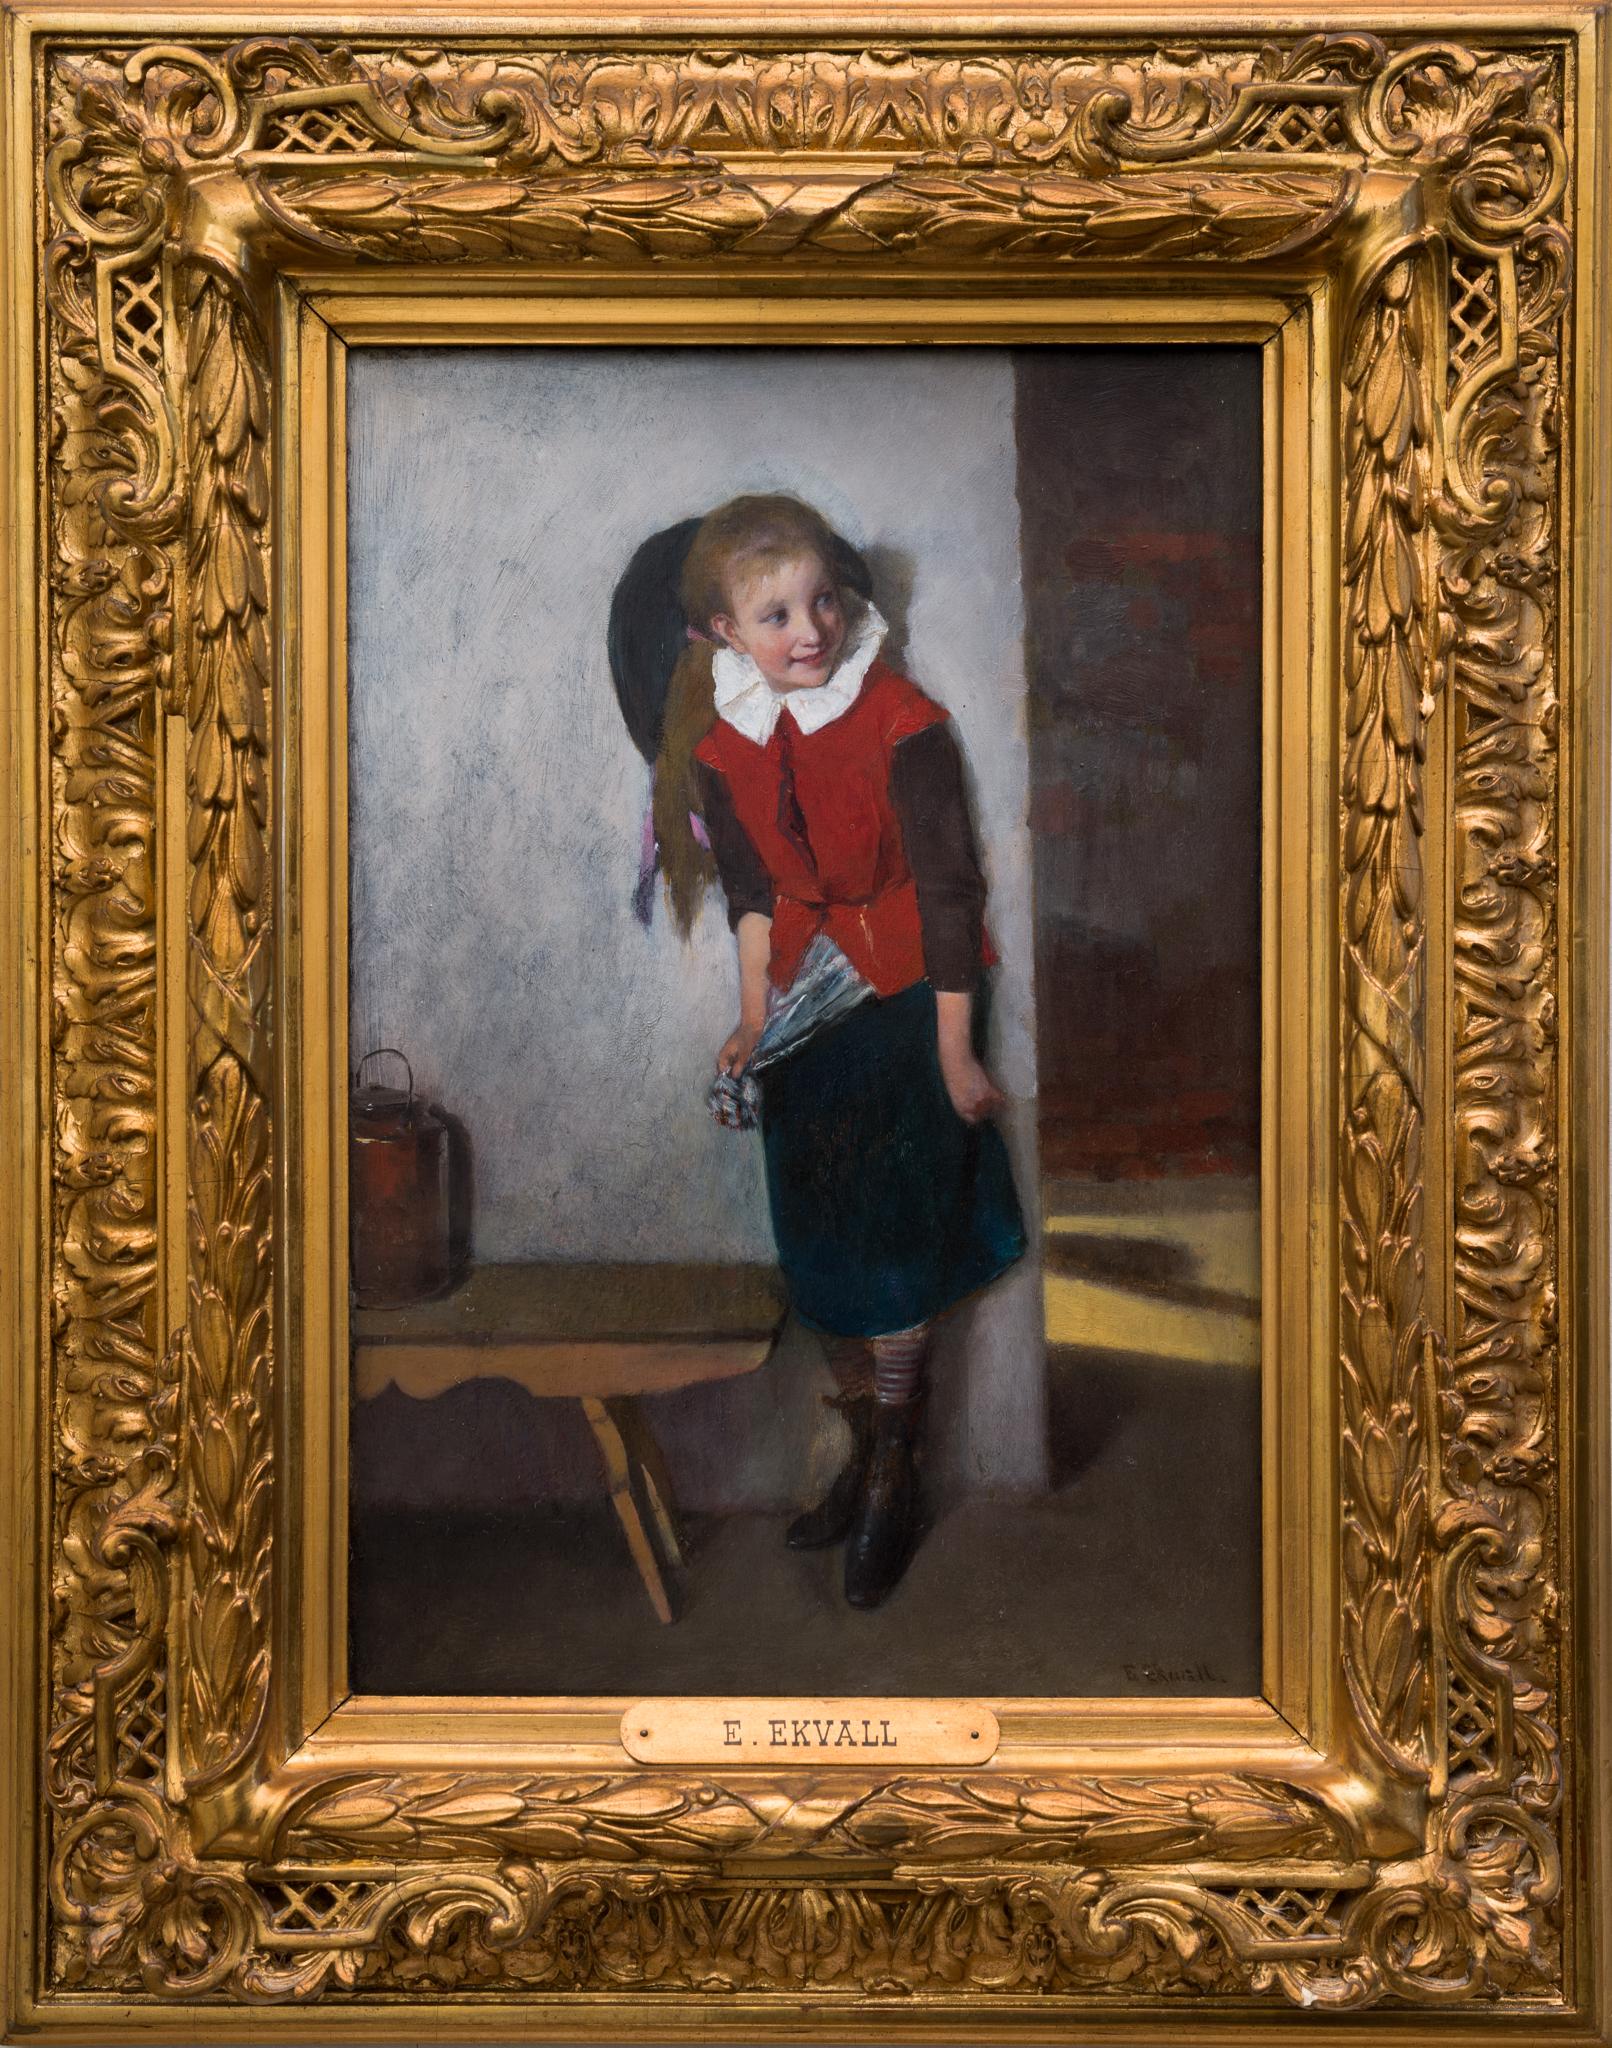 Emma Ekwall (1838-1925) Sweden

Hide and Seek

oil on wood panel
signed E Ekwall
panel dimensions: 33 cm x 22.5 cm (12.99 x 8.86 inches) 
frame dimensions: 48 cm x 38.5 cm (18.90 x 15.16 inches)

Provenance:
A Swedish private collection. 

Essay:
We